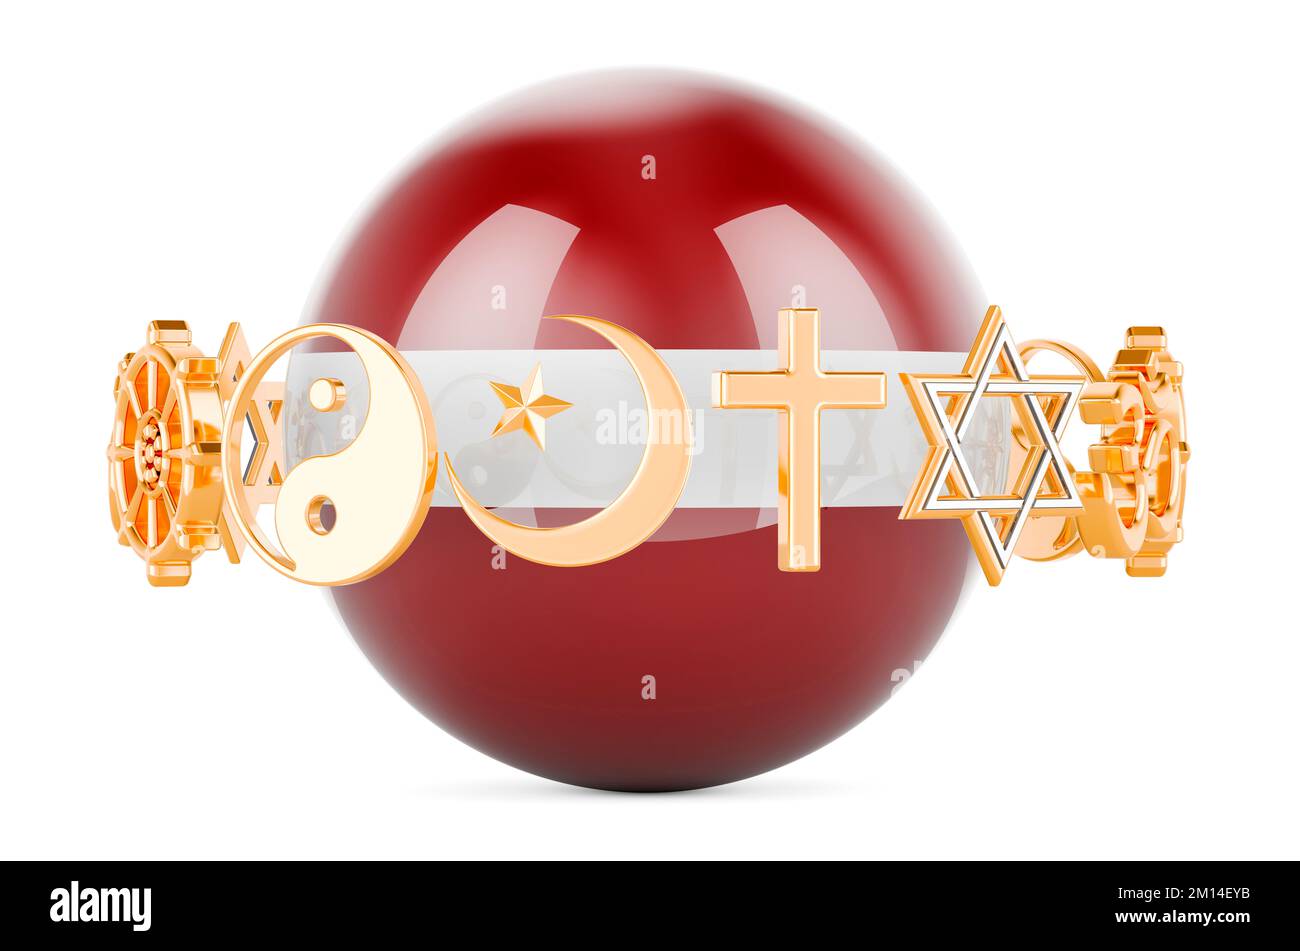 Latvian flag painted on sphere with religions symbols around, 3D rendering isolated on white background Stock Photo